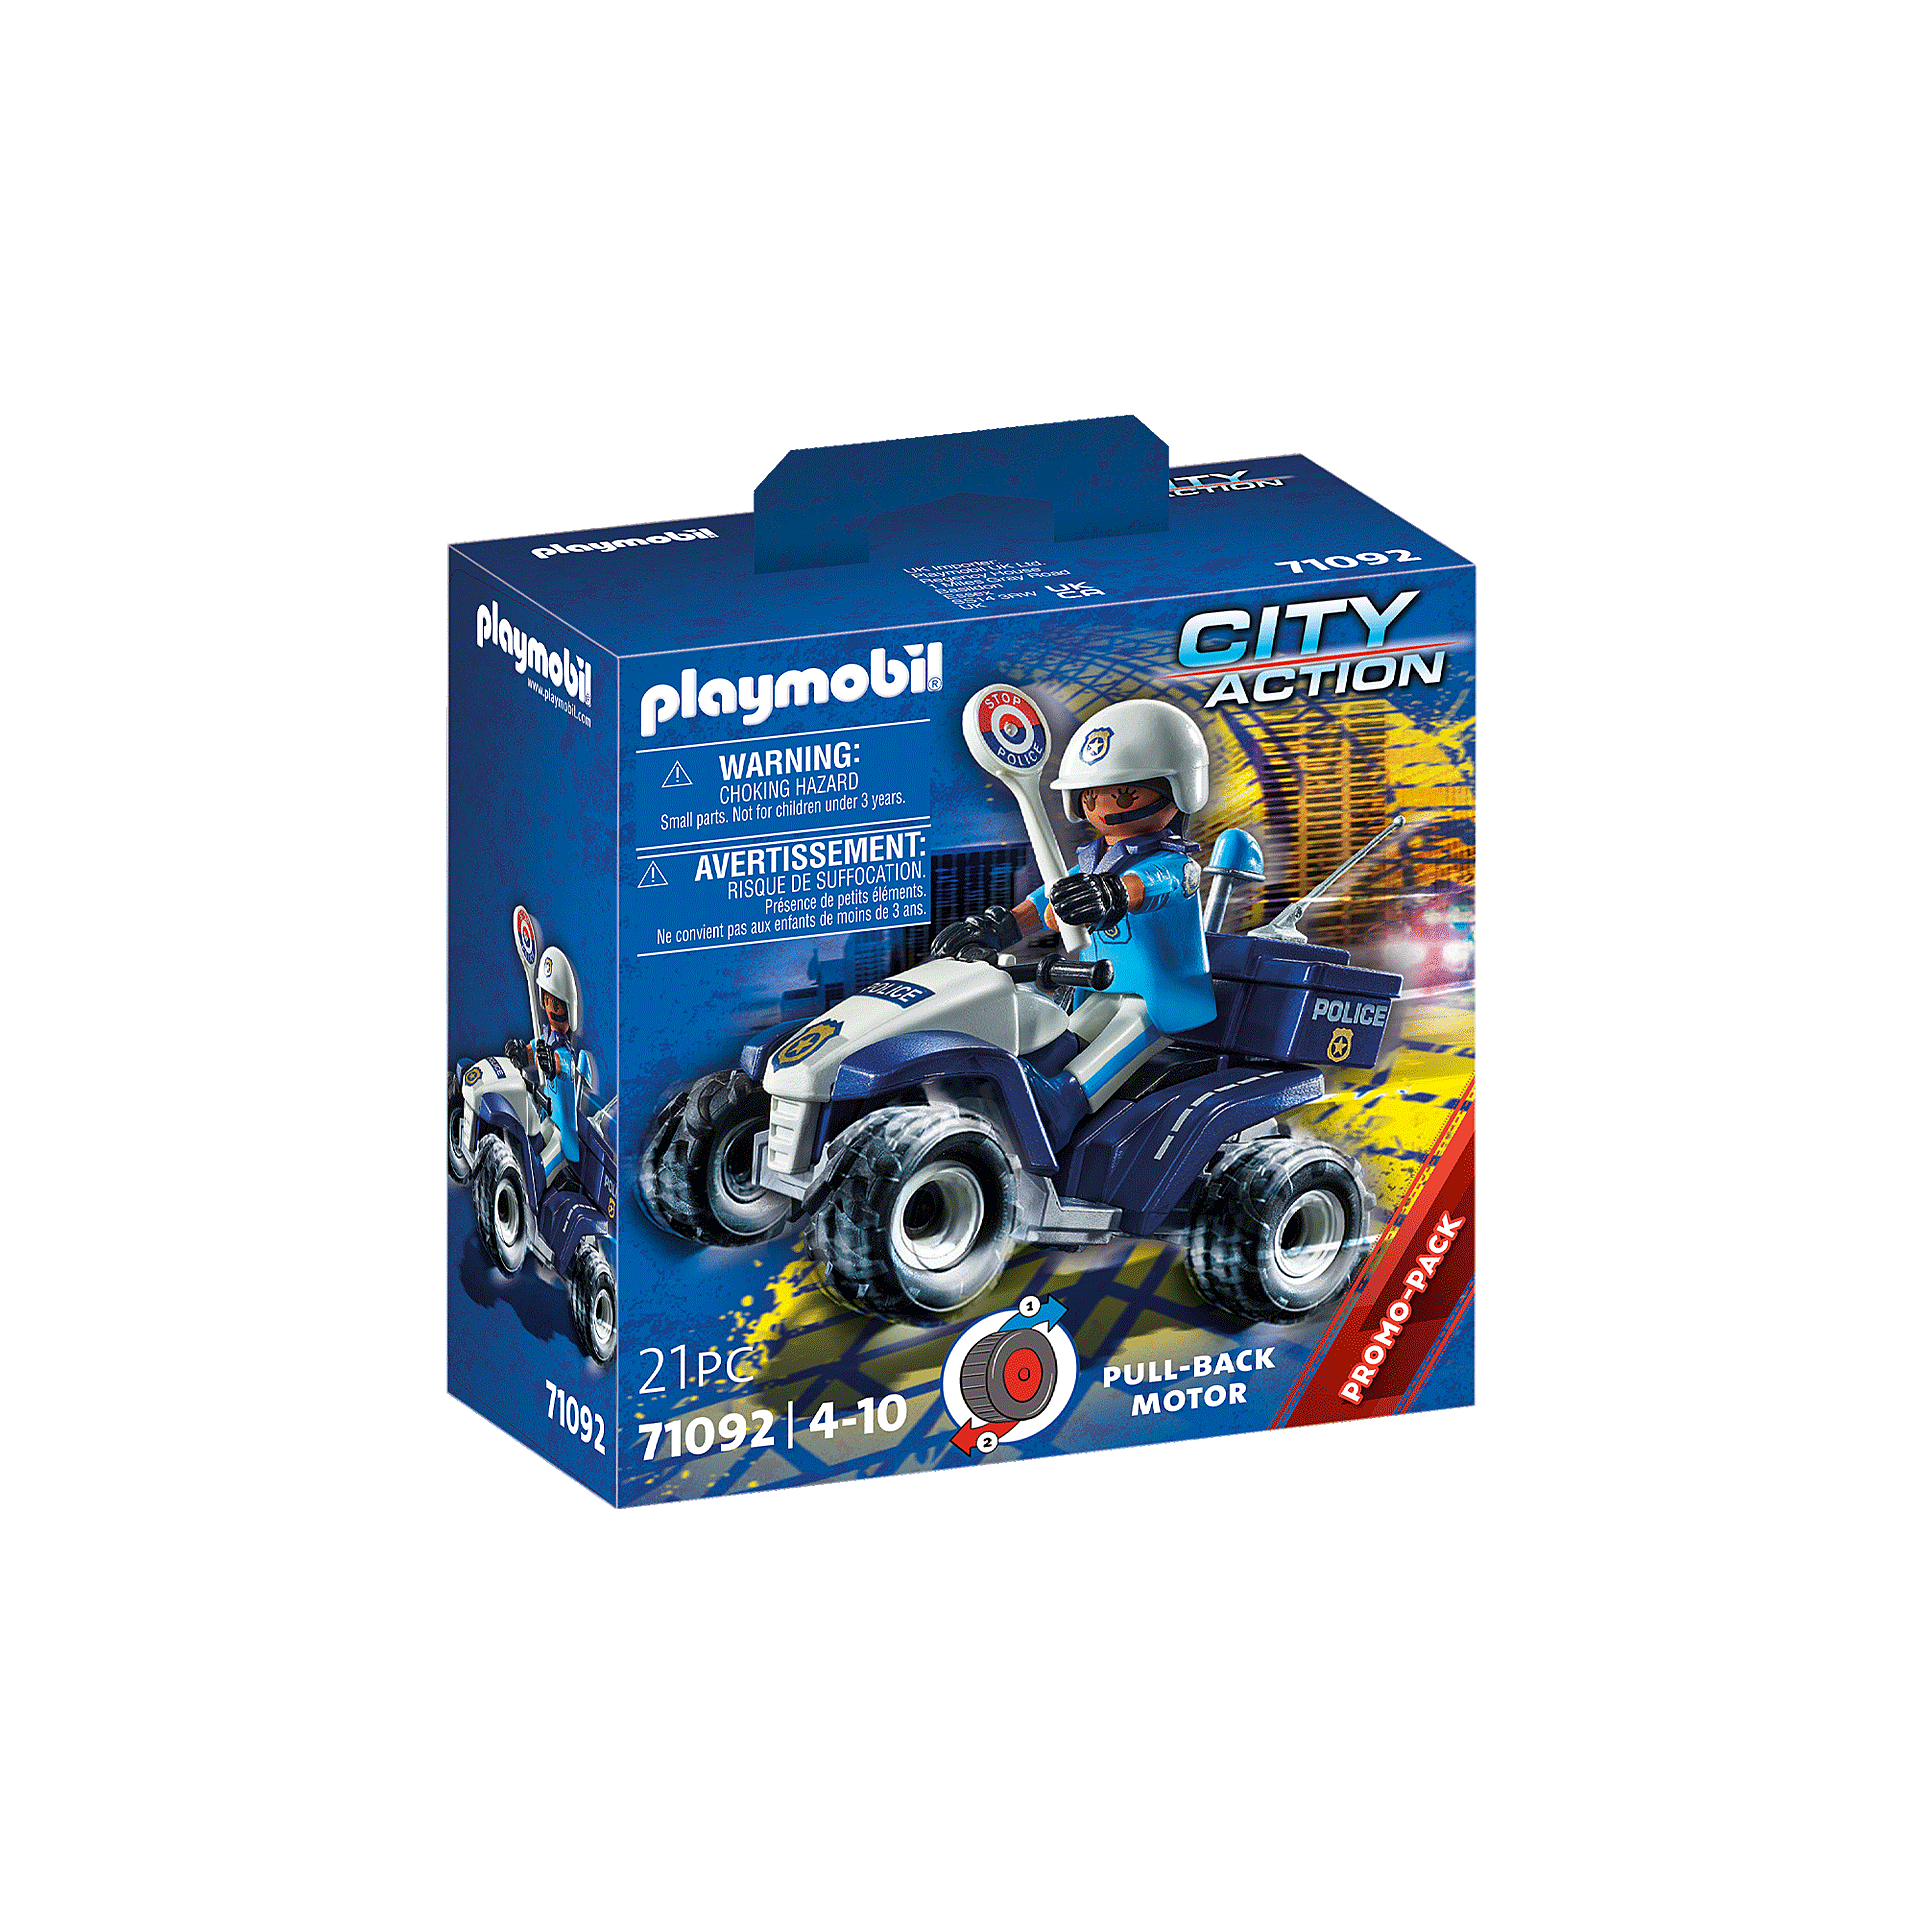 Playmobil-City Action - Police Quad-71092-Legacy Toys